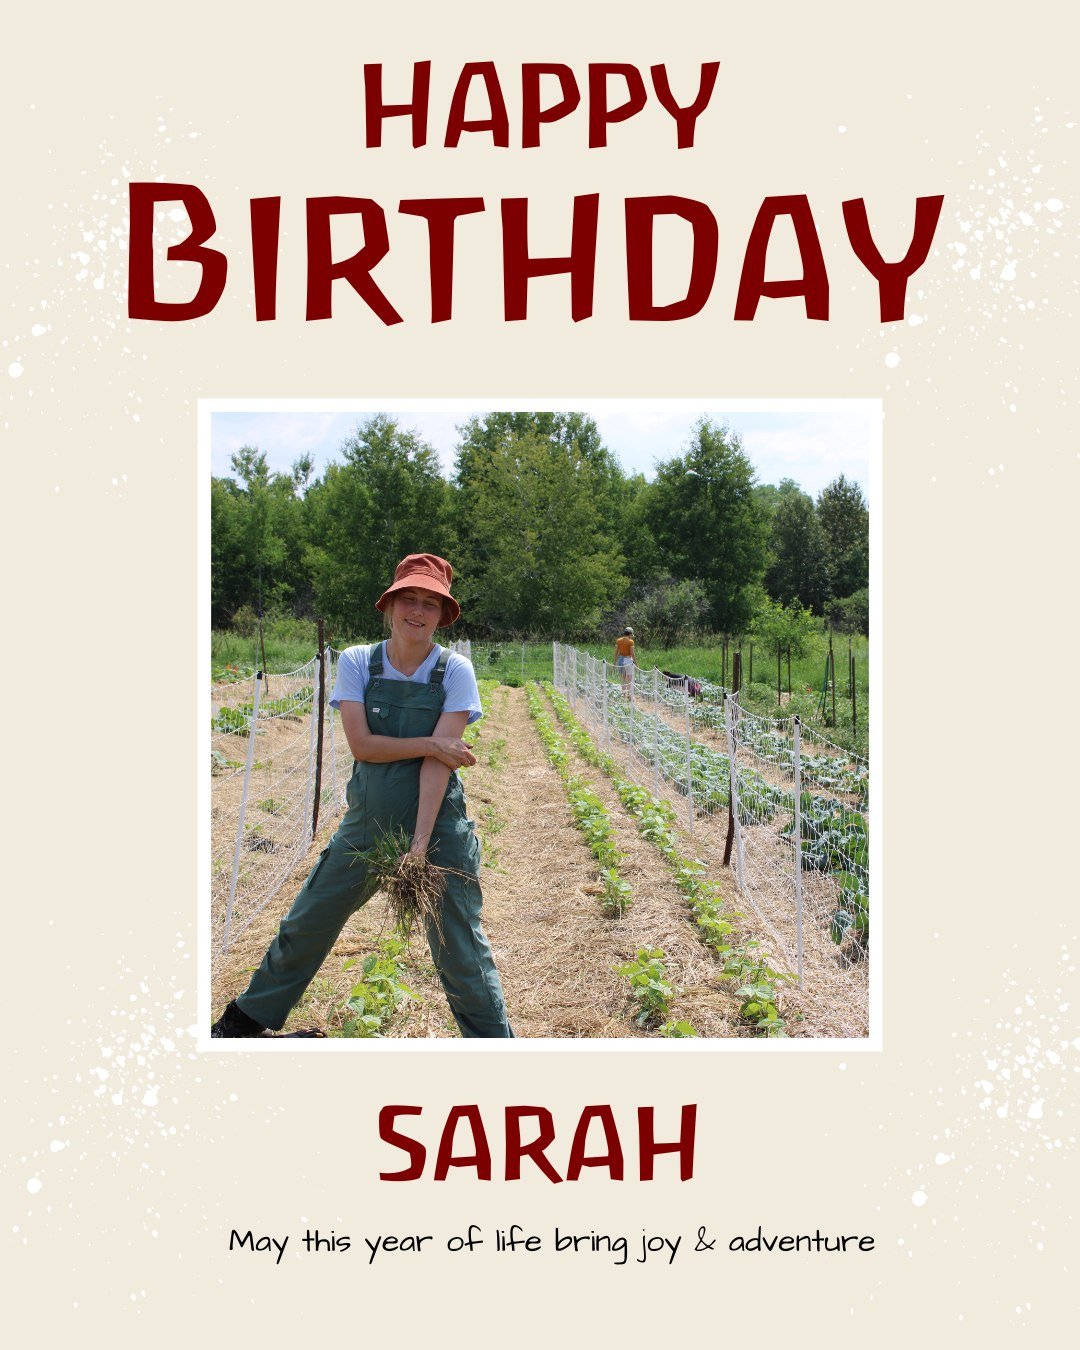 Happy Birthday Sarah! We hope you have a great day today!